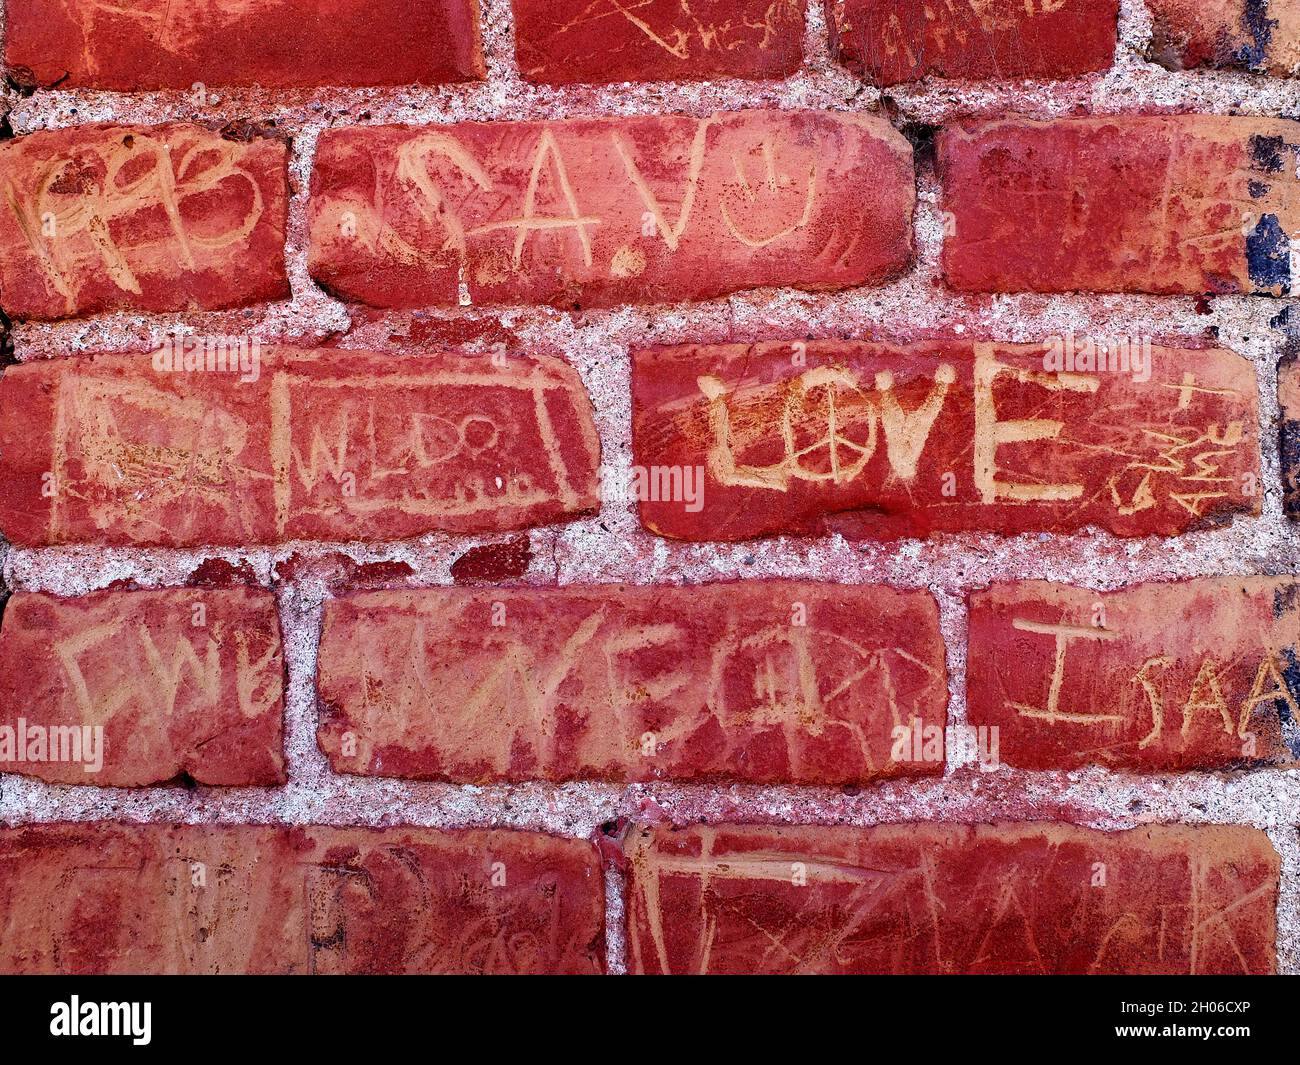 Detail of Old Red Brick Wall with Words Names and Love Scratched or Carved In Stock Photo